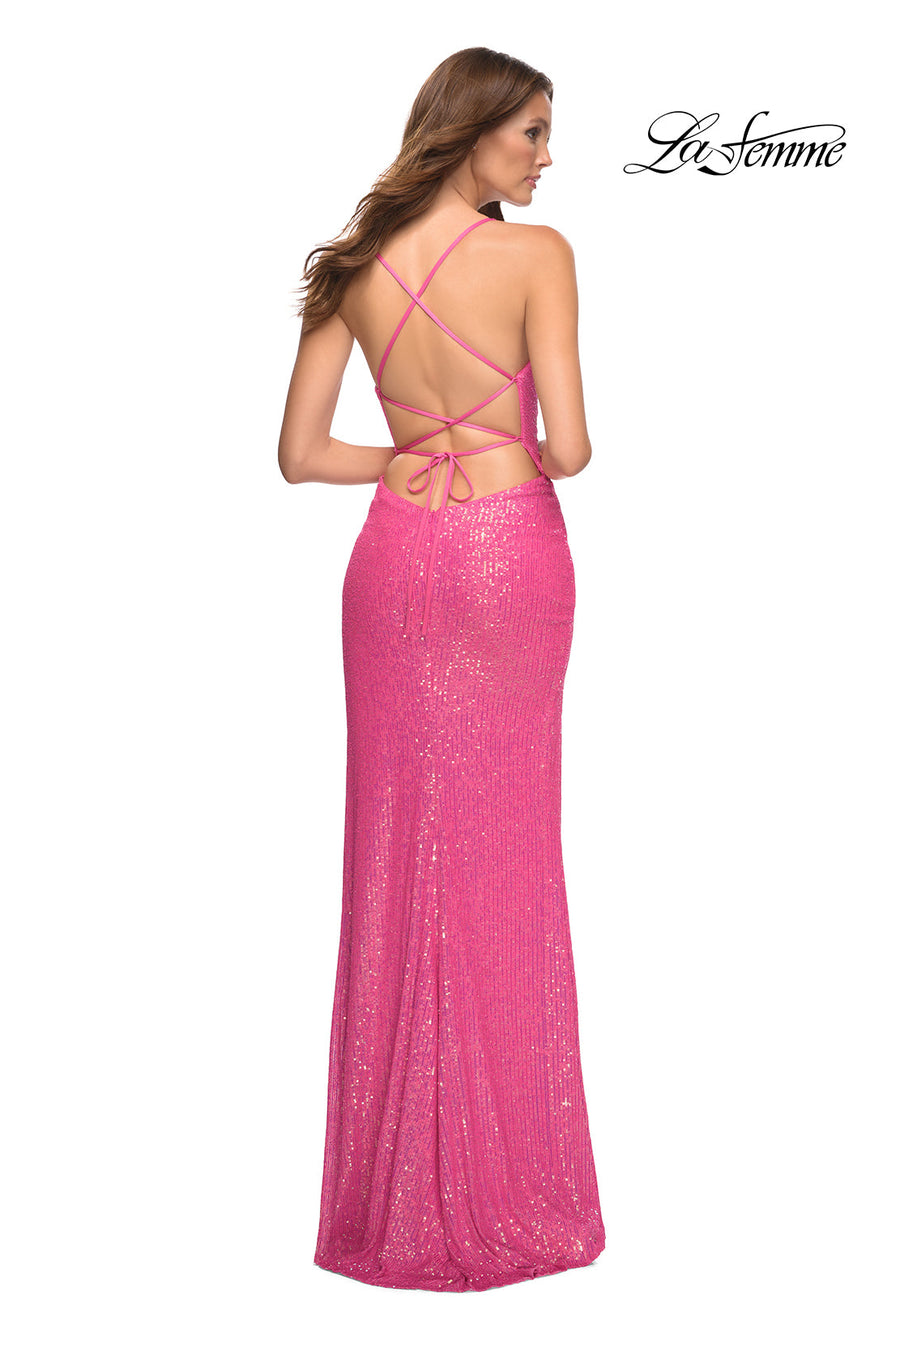 La Femme 30624 prom dress images.  La Femme 30624 is available in these colors: Hot Pink.